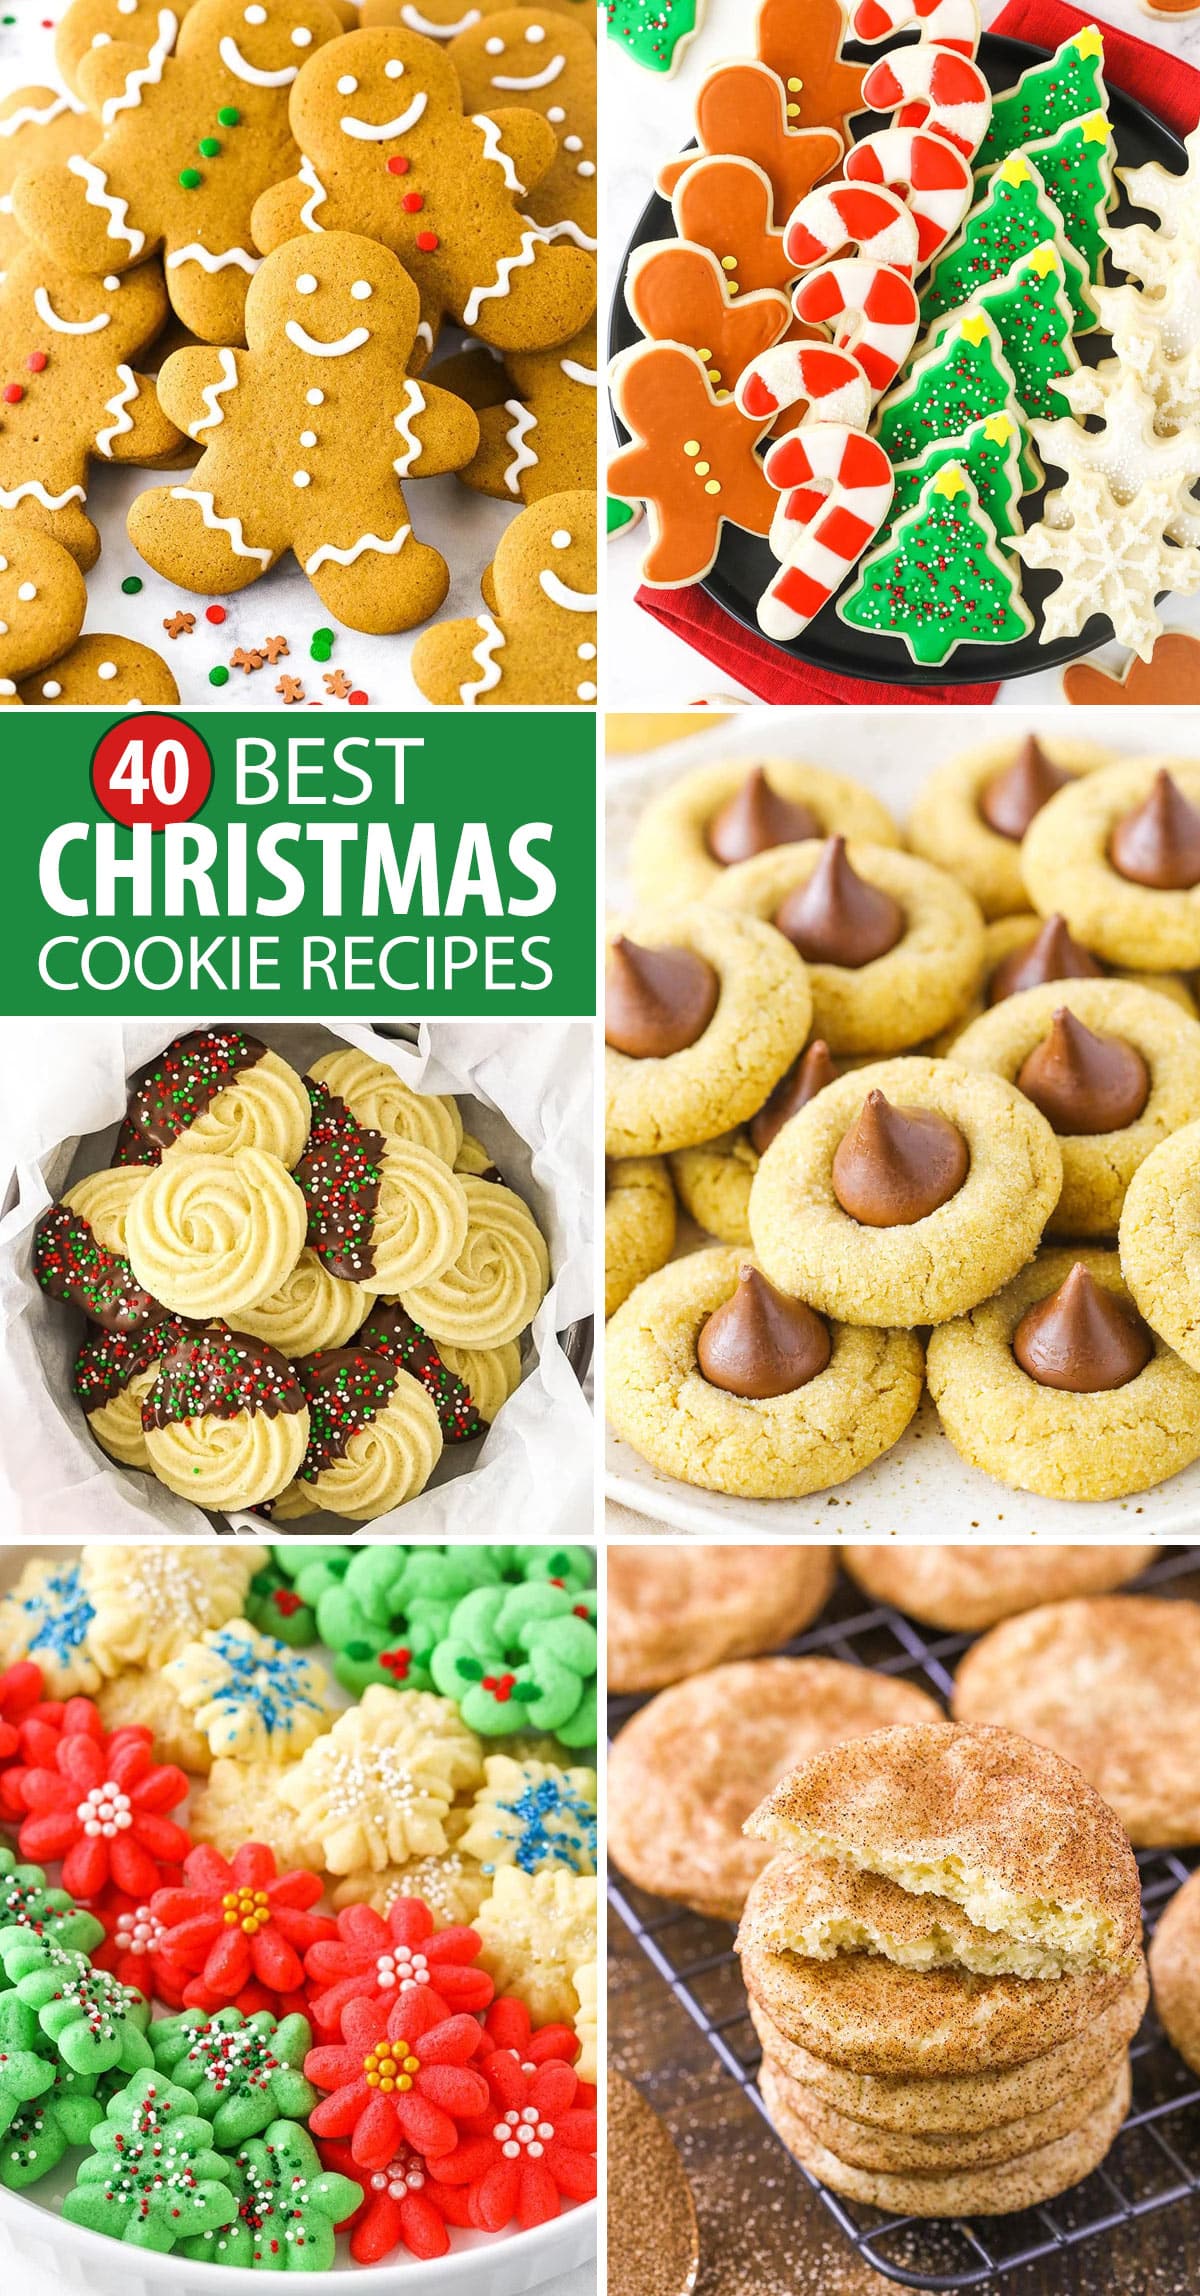 collage of christmas cookies - gingerbread, cutout cookies, peanut butter blossoms, butter, spritz and snickerdoodle